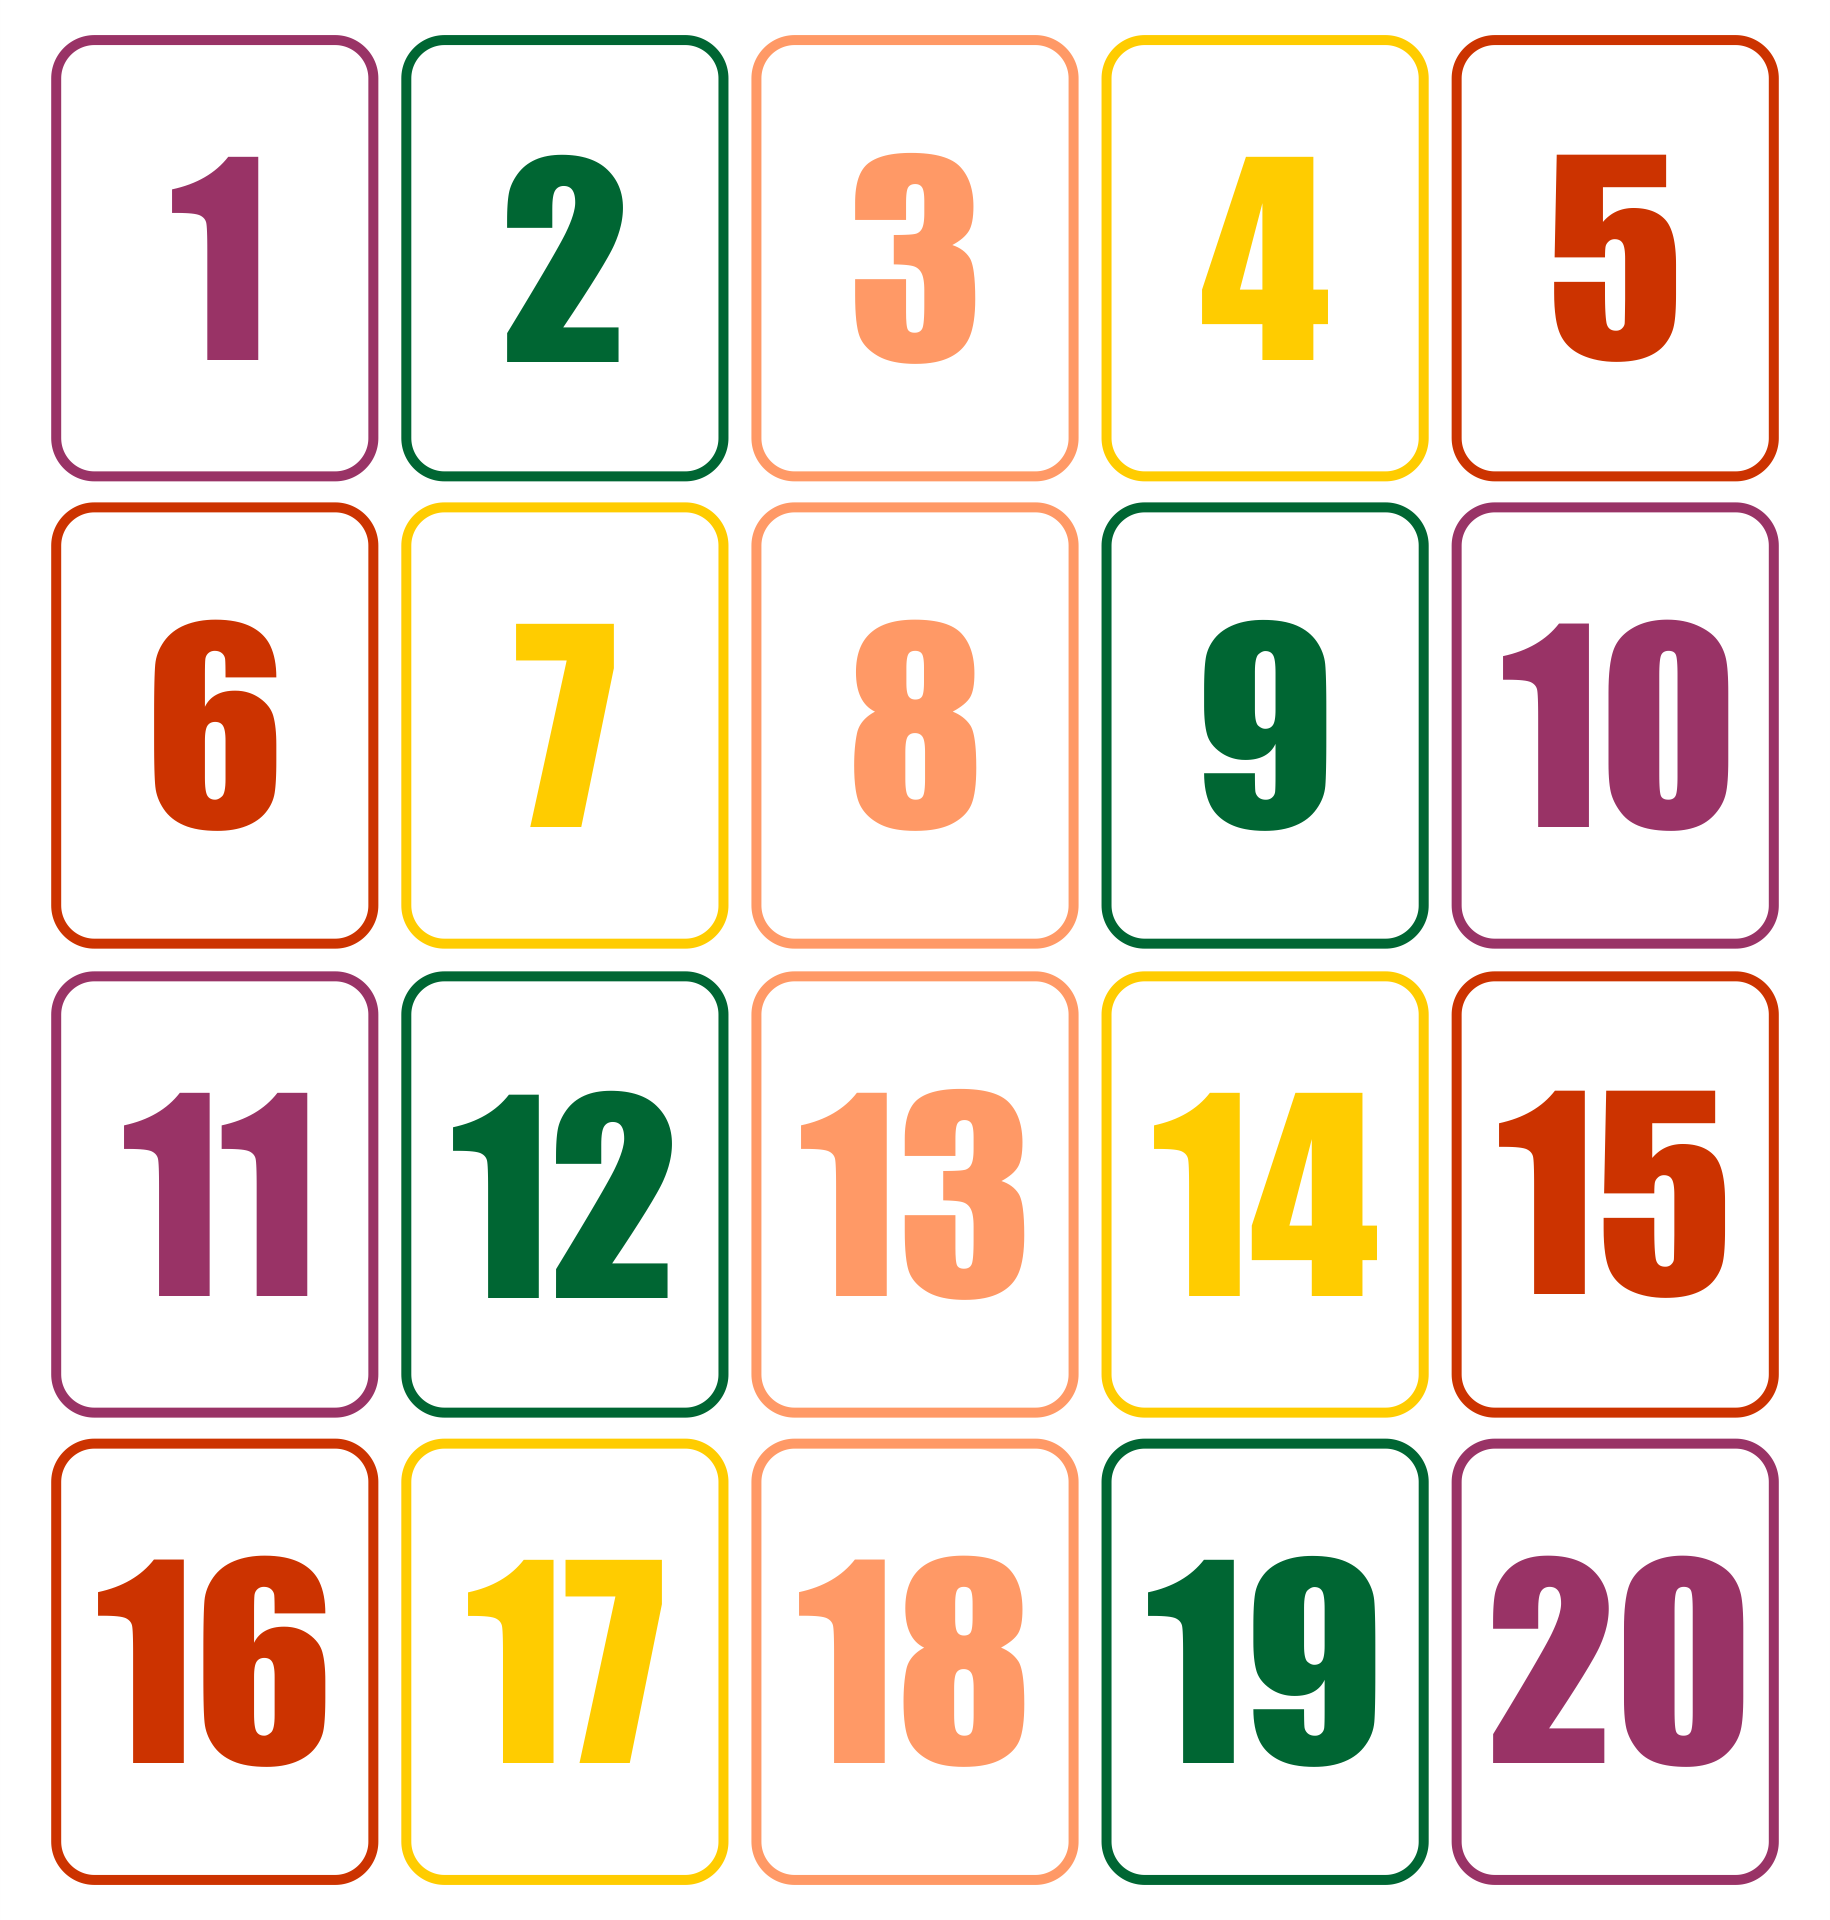 4 Best Images of Large Printable Number Cards 1 20 Printable Number Flash Card 1, Printable